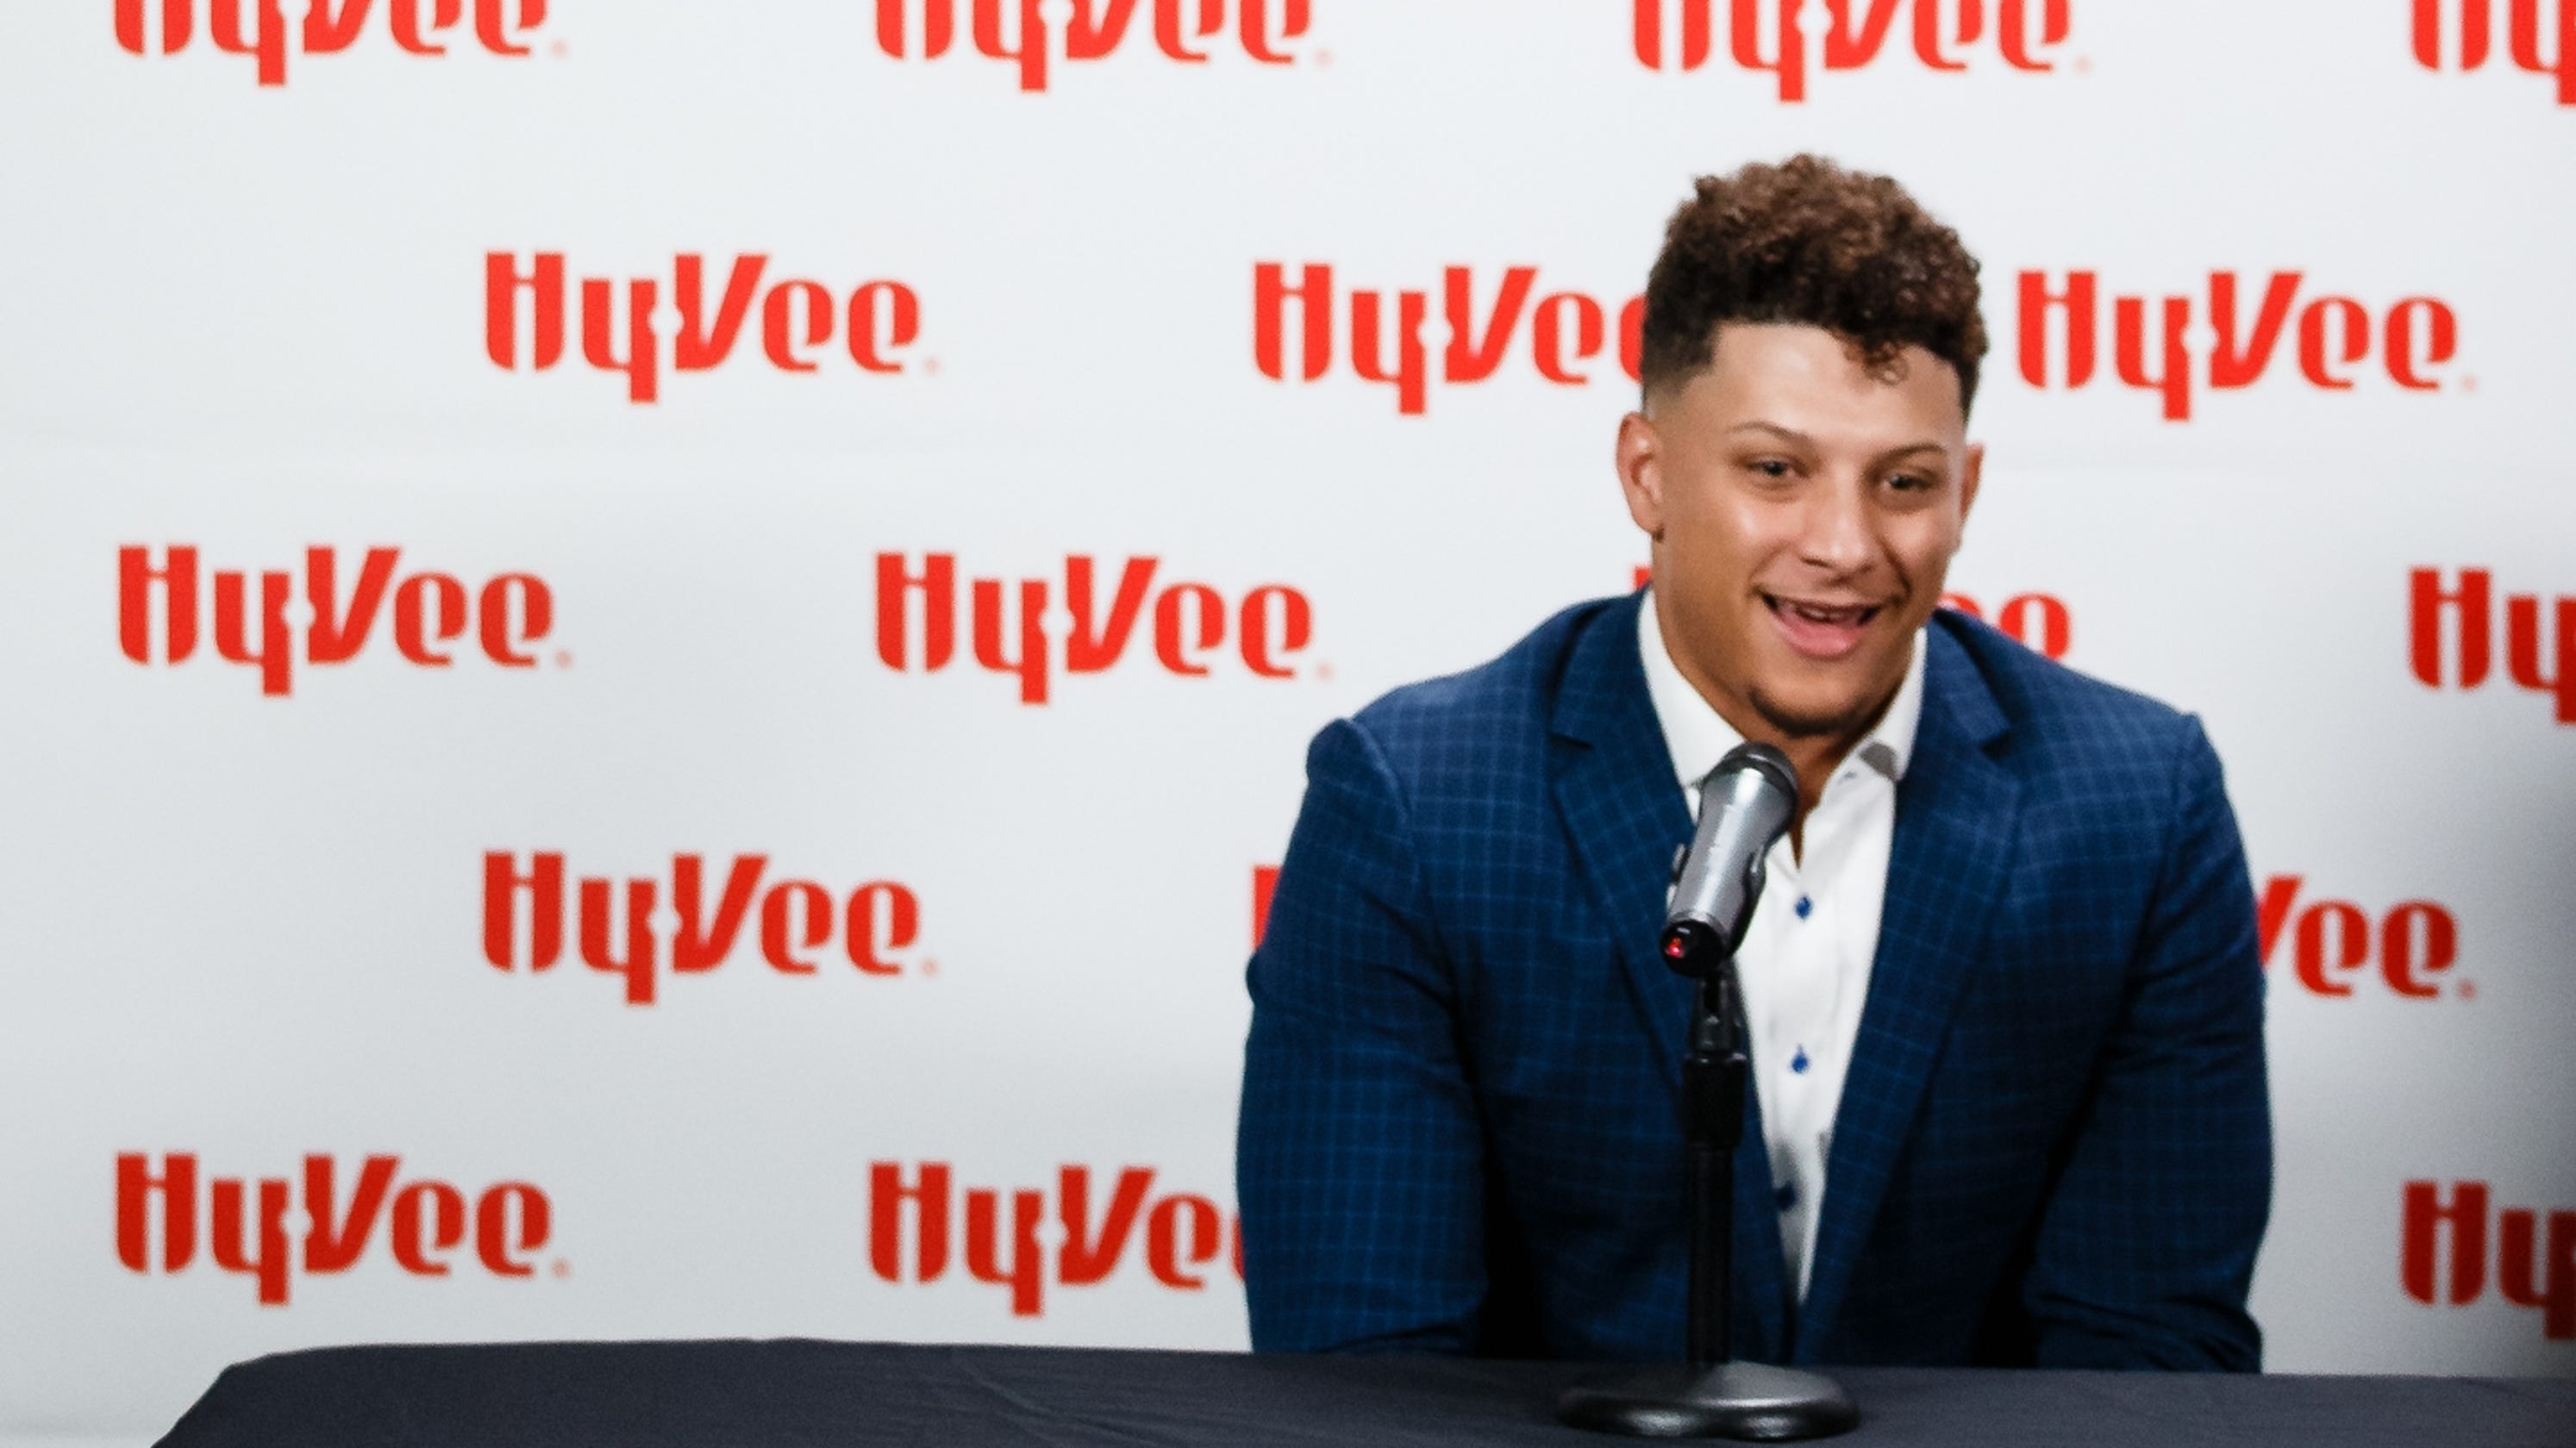 Hy-Vee turns to celebrity influencers like Patrick Mahomes to reach millennials